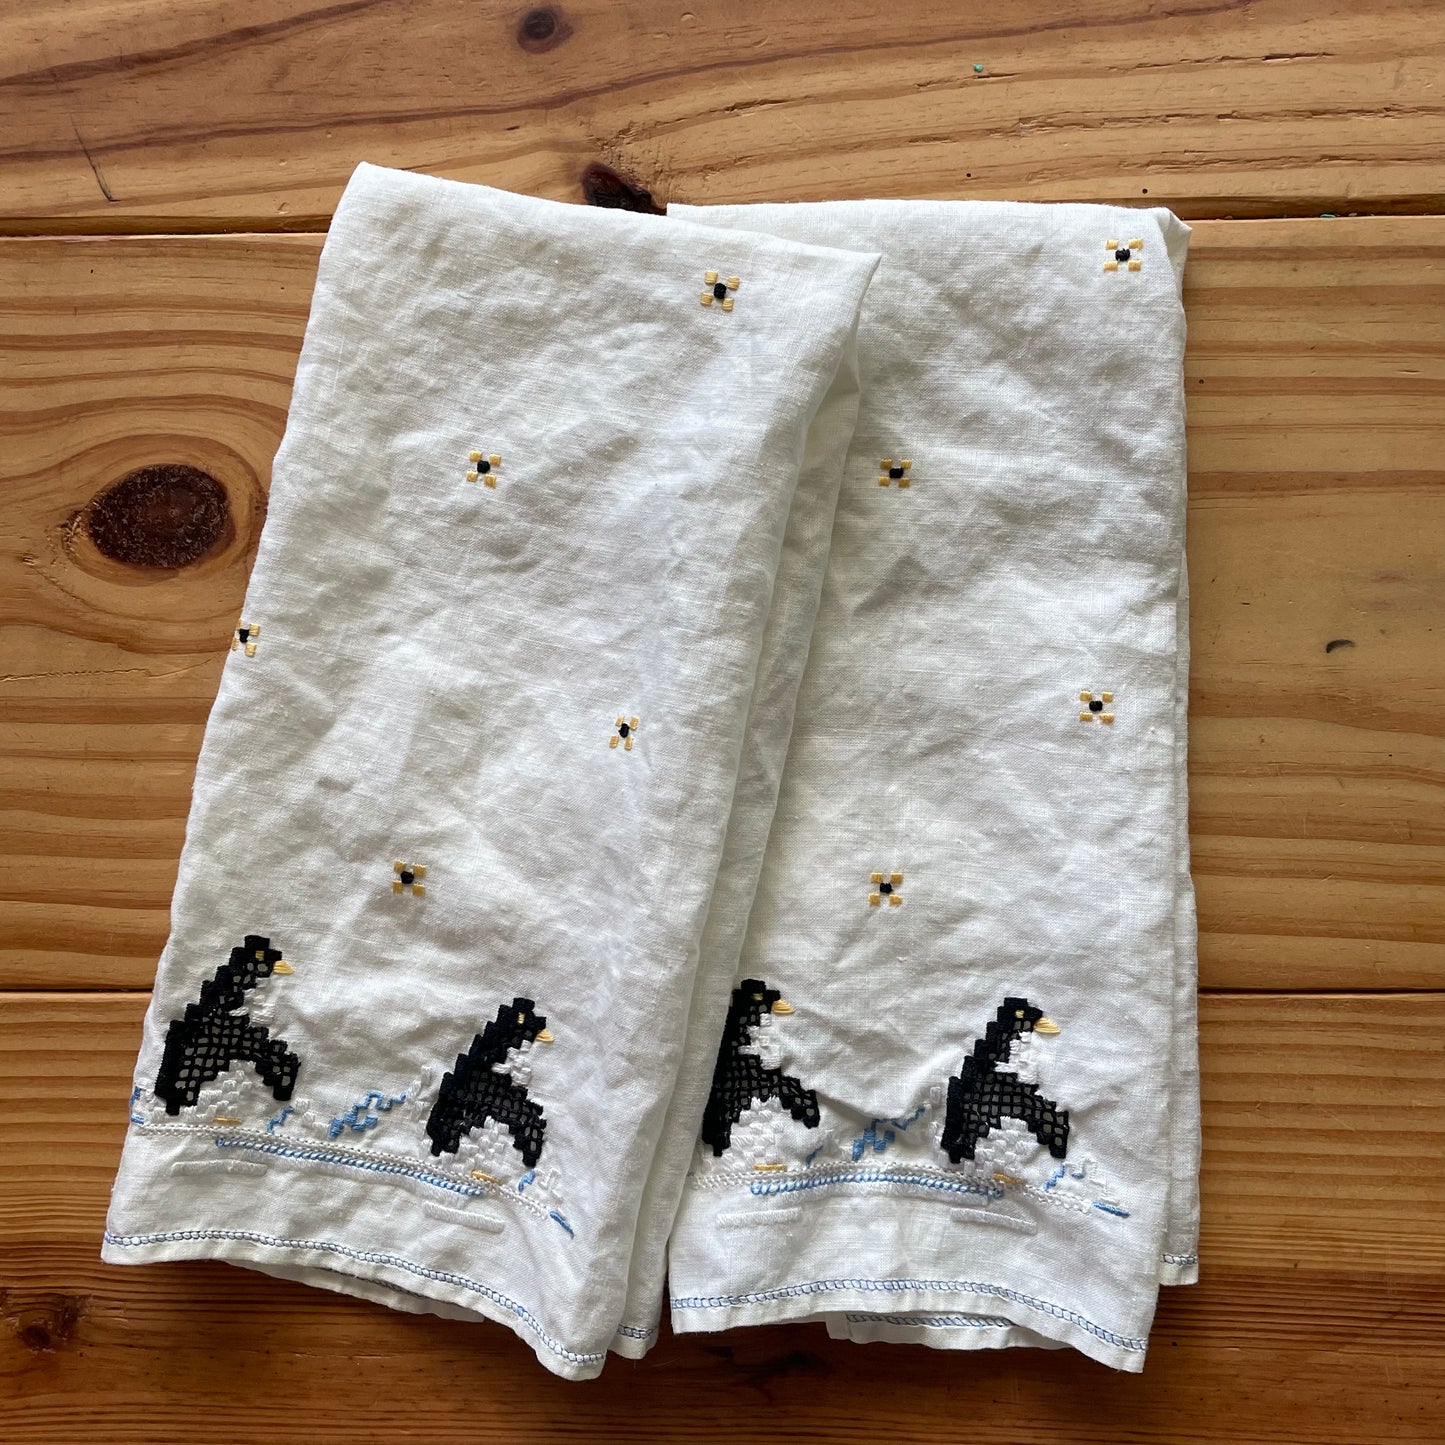 1940s-1950s Embroidered Penguin Tea Towels